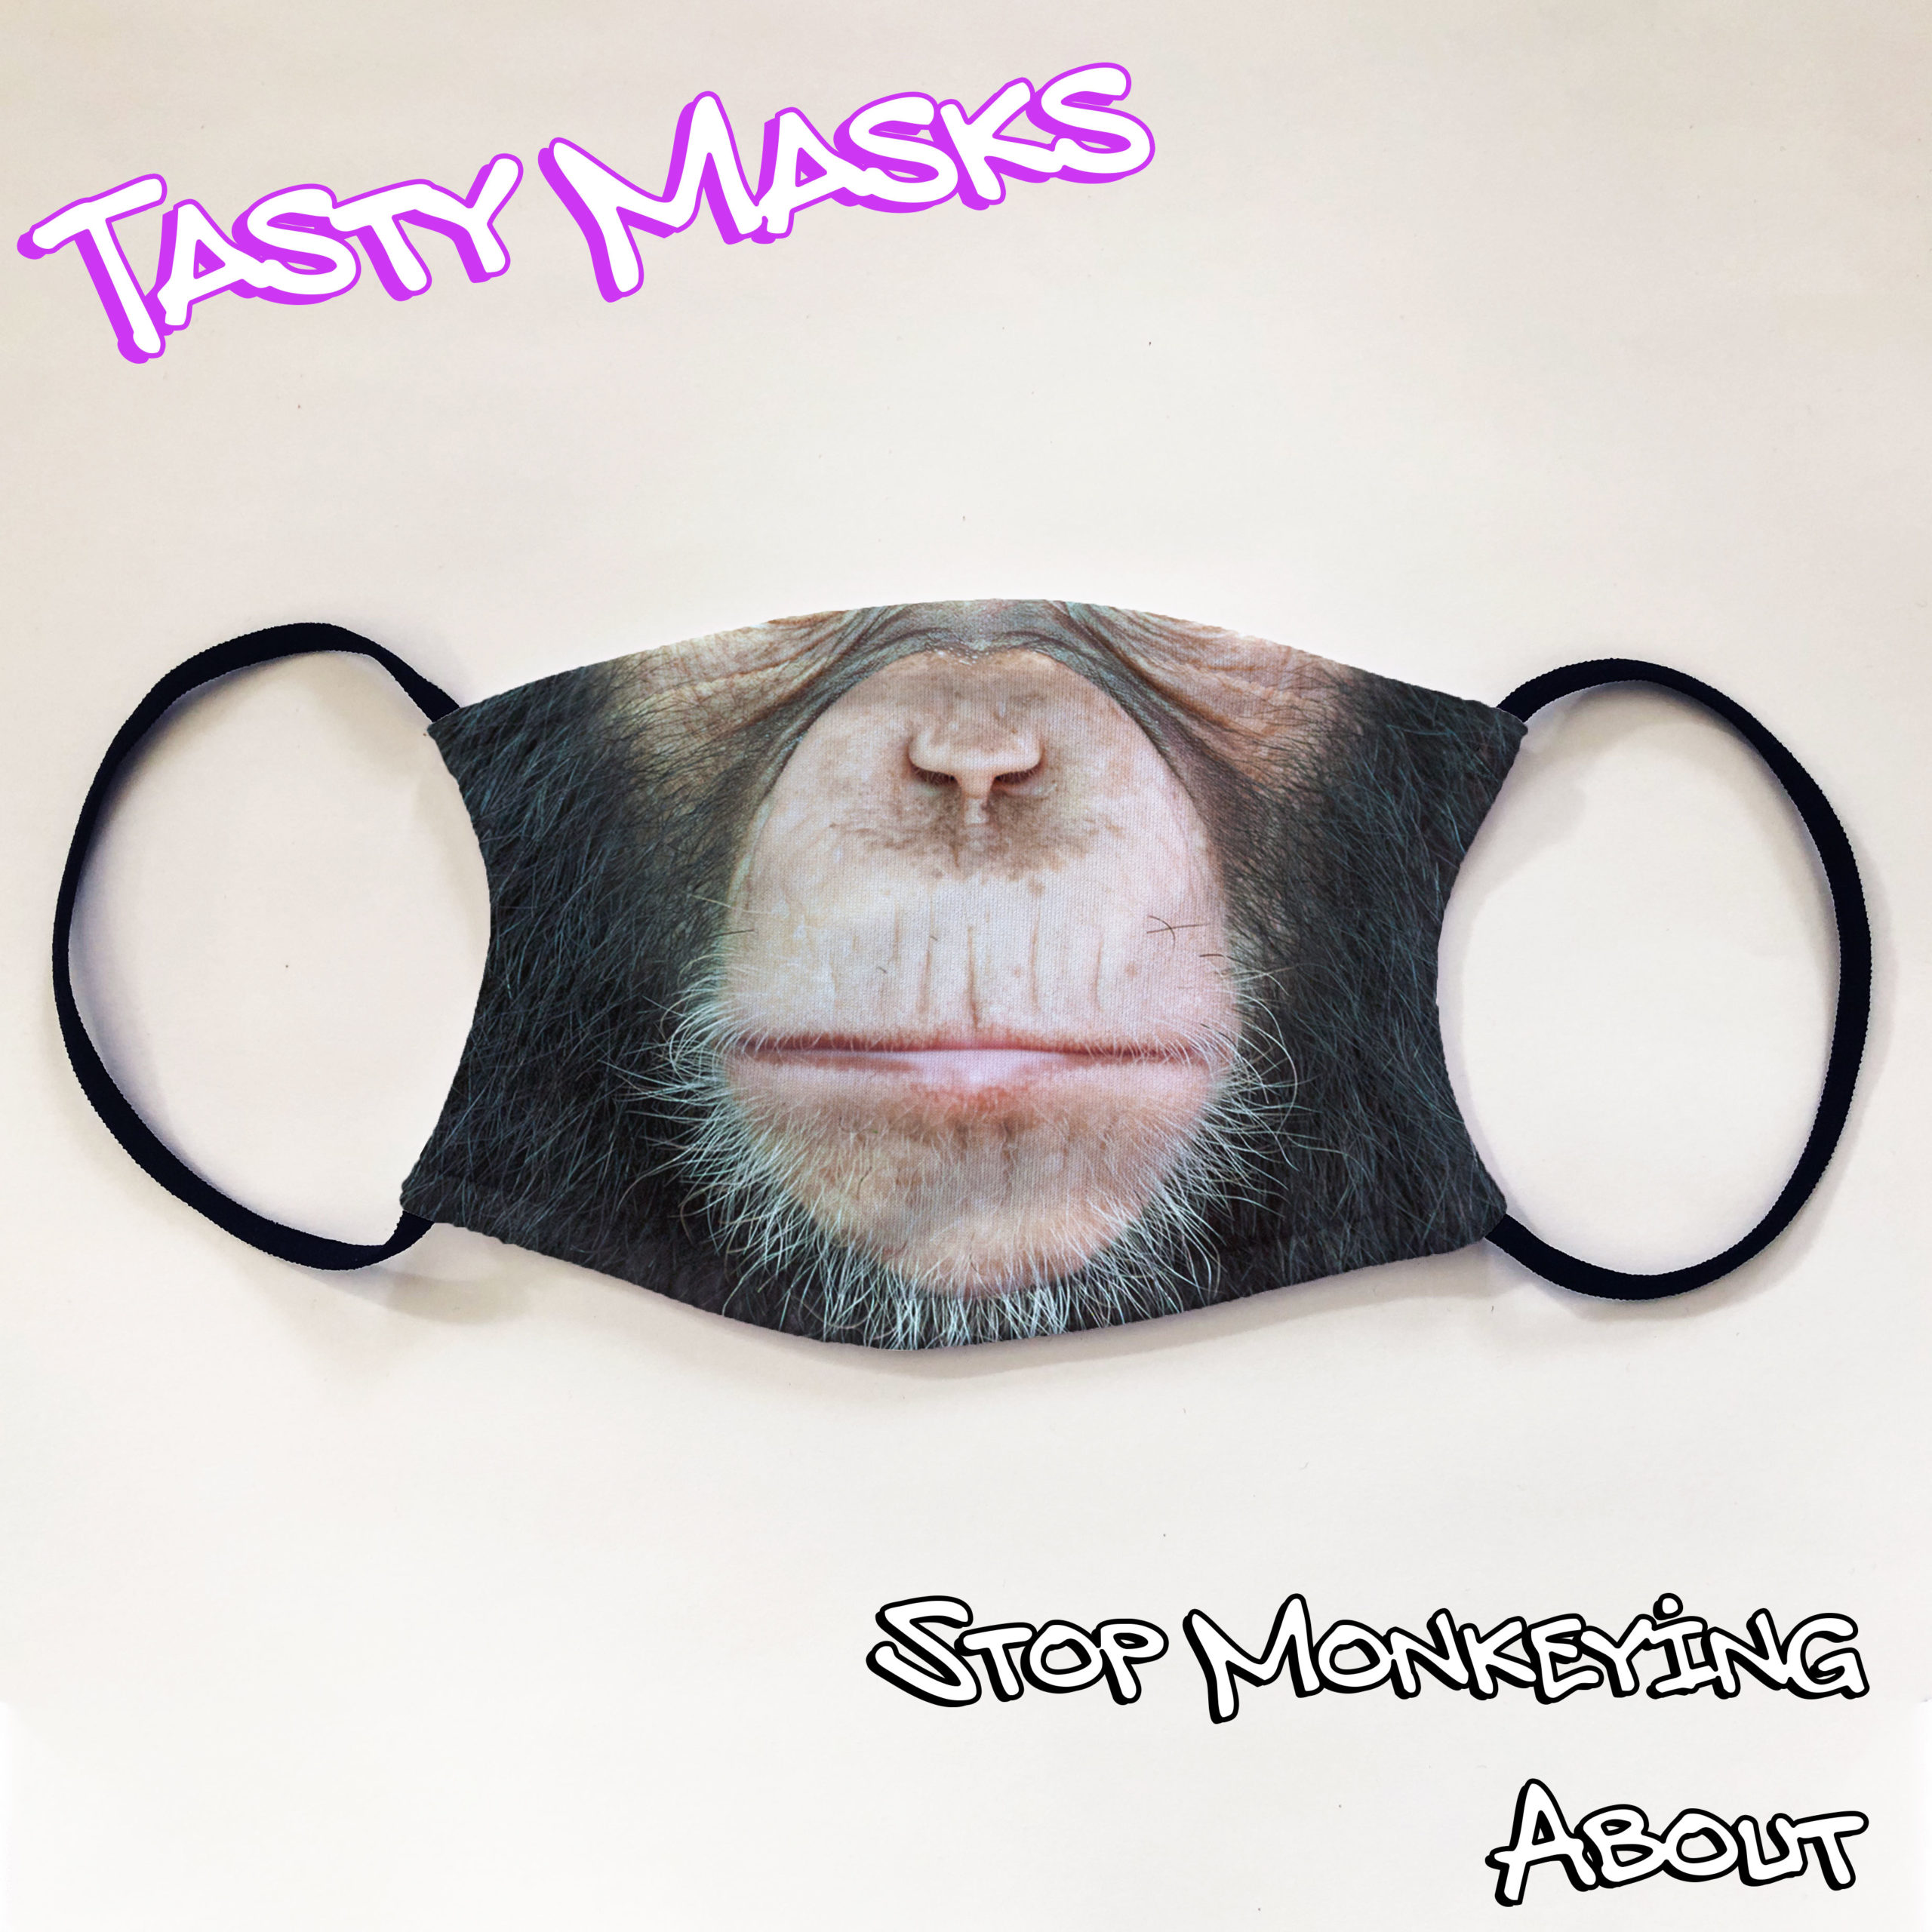 Facemask design of chimpanzee monkey face nose & mouth